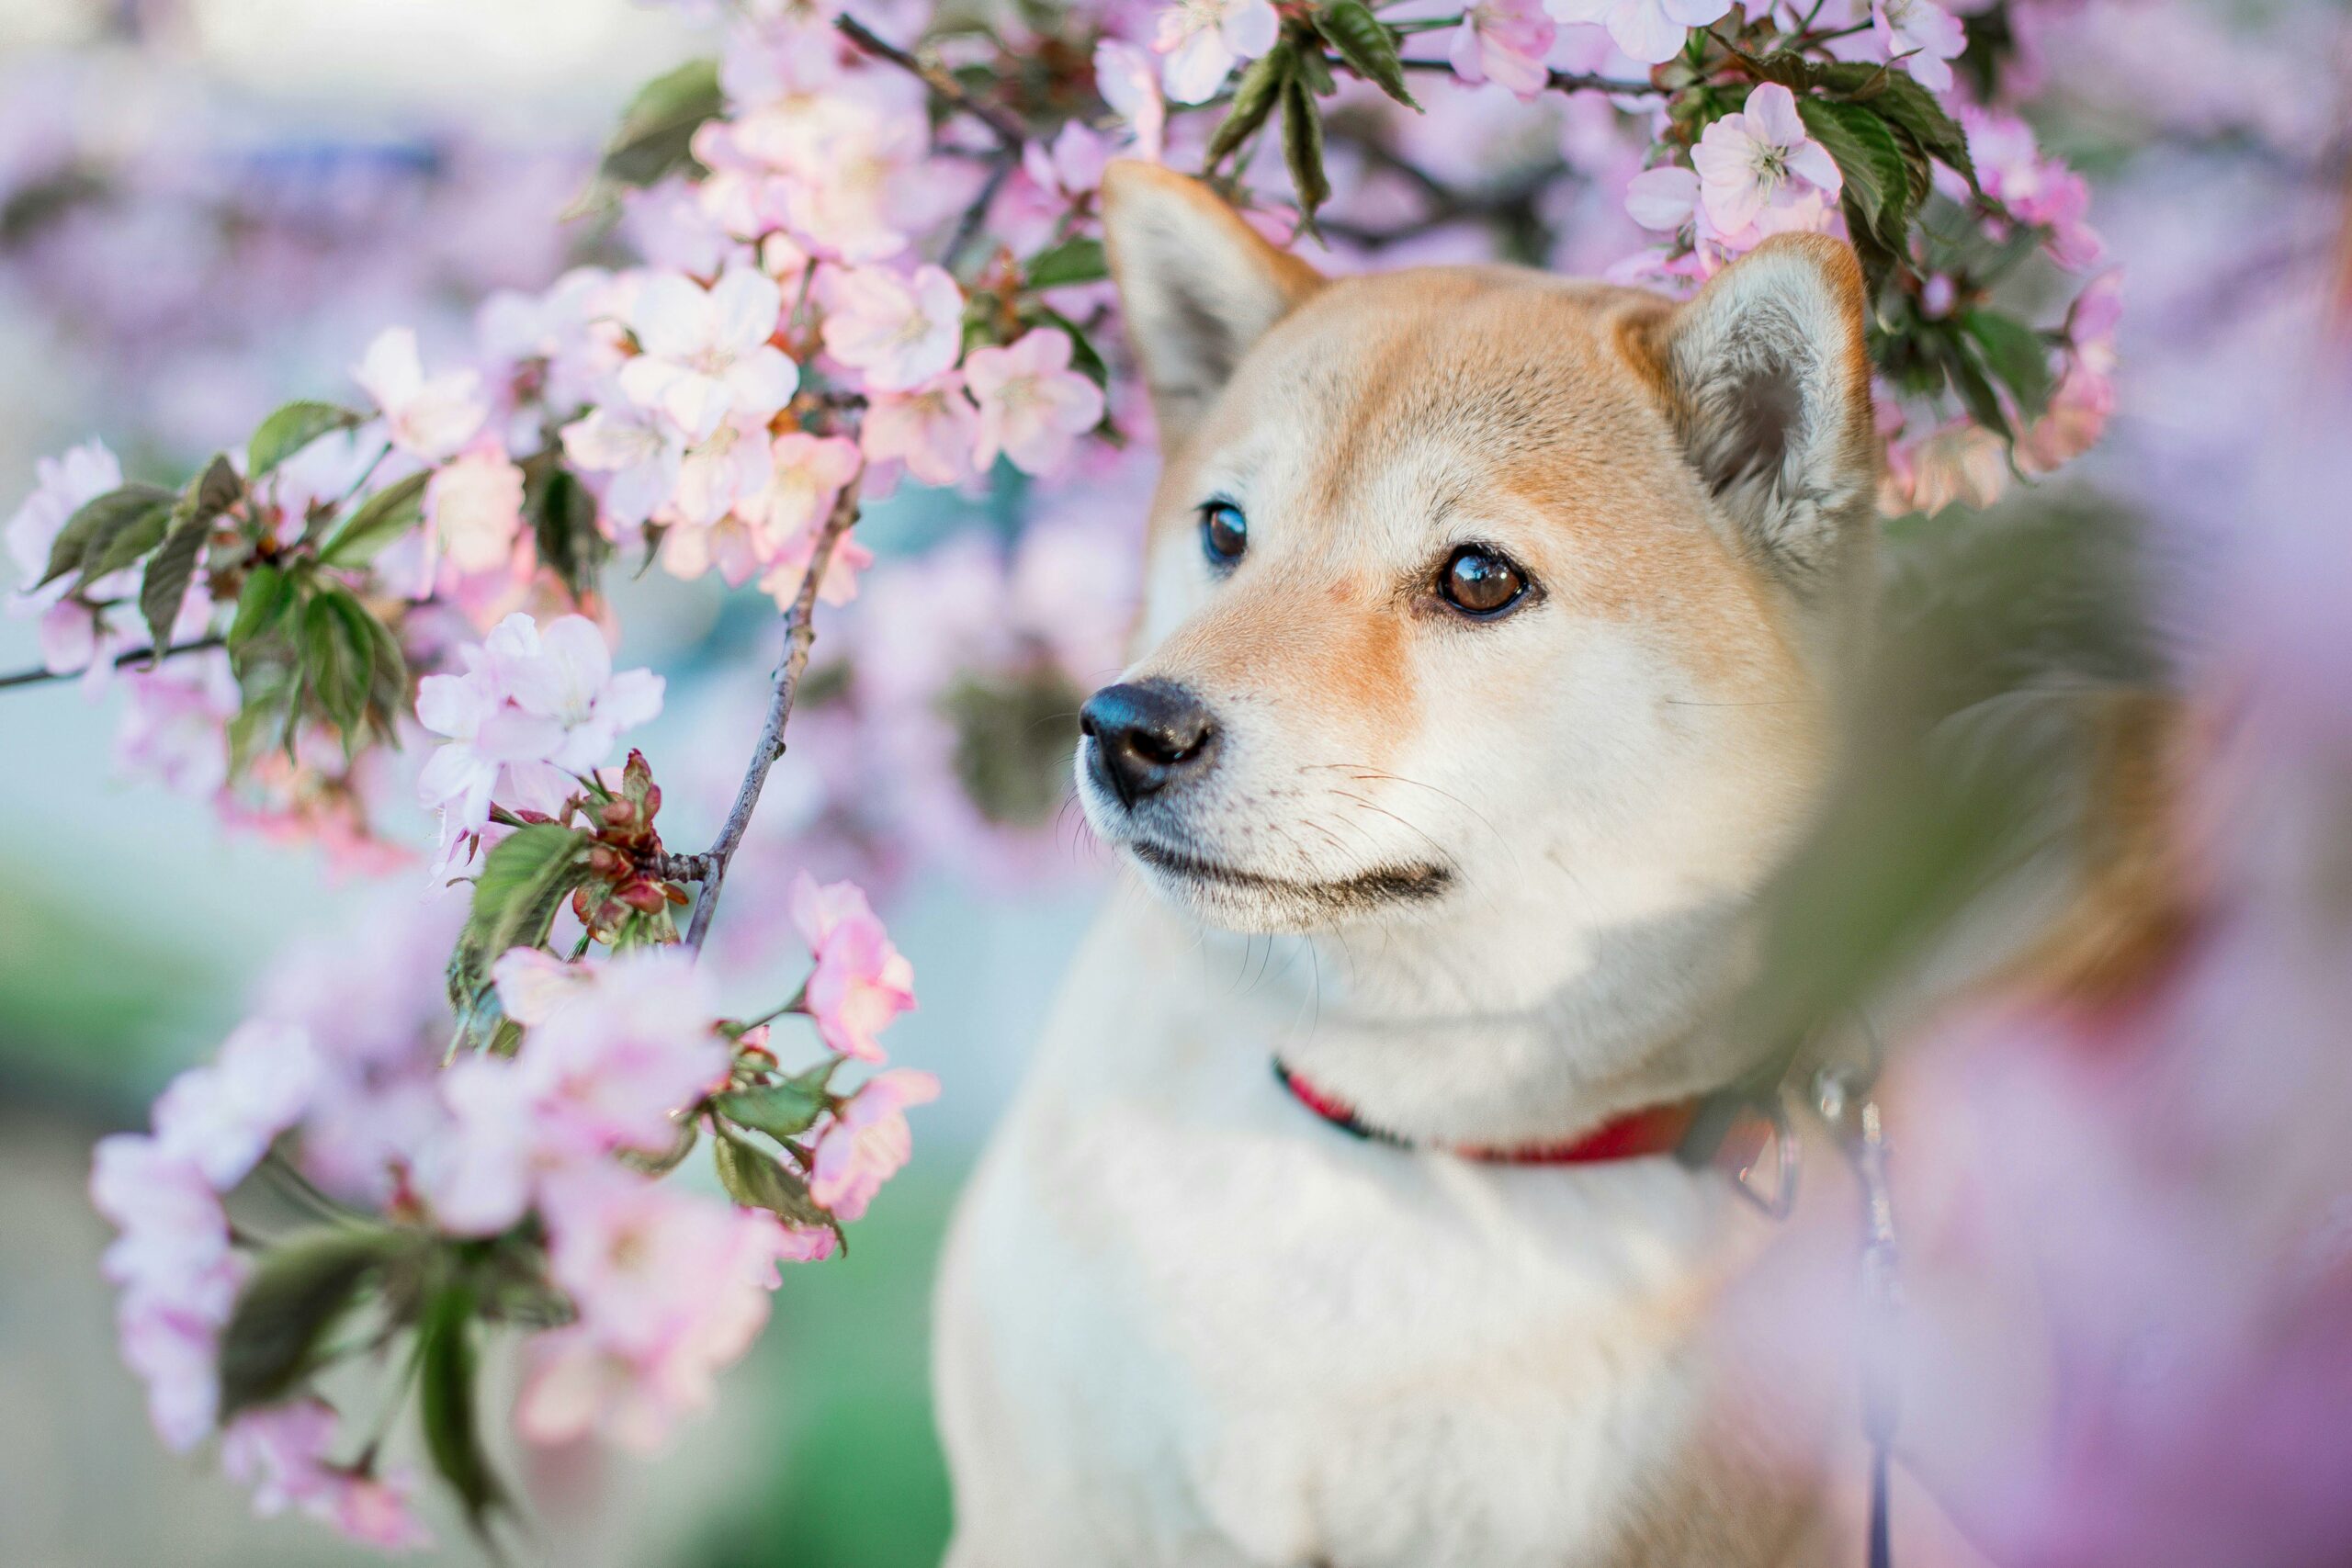 A tan dog with pointy ears stands among flower blossoms